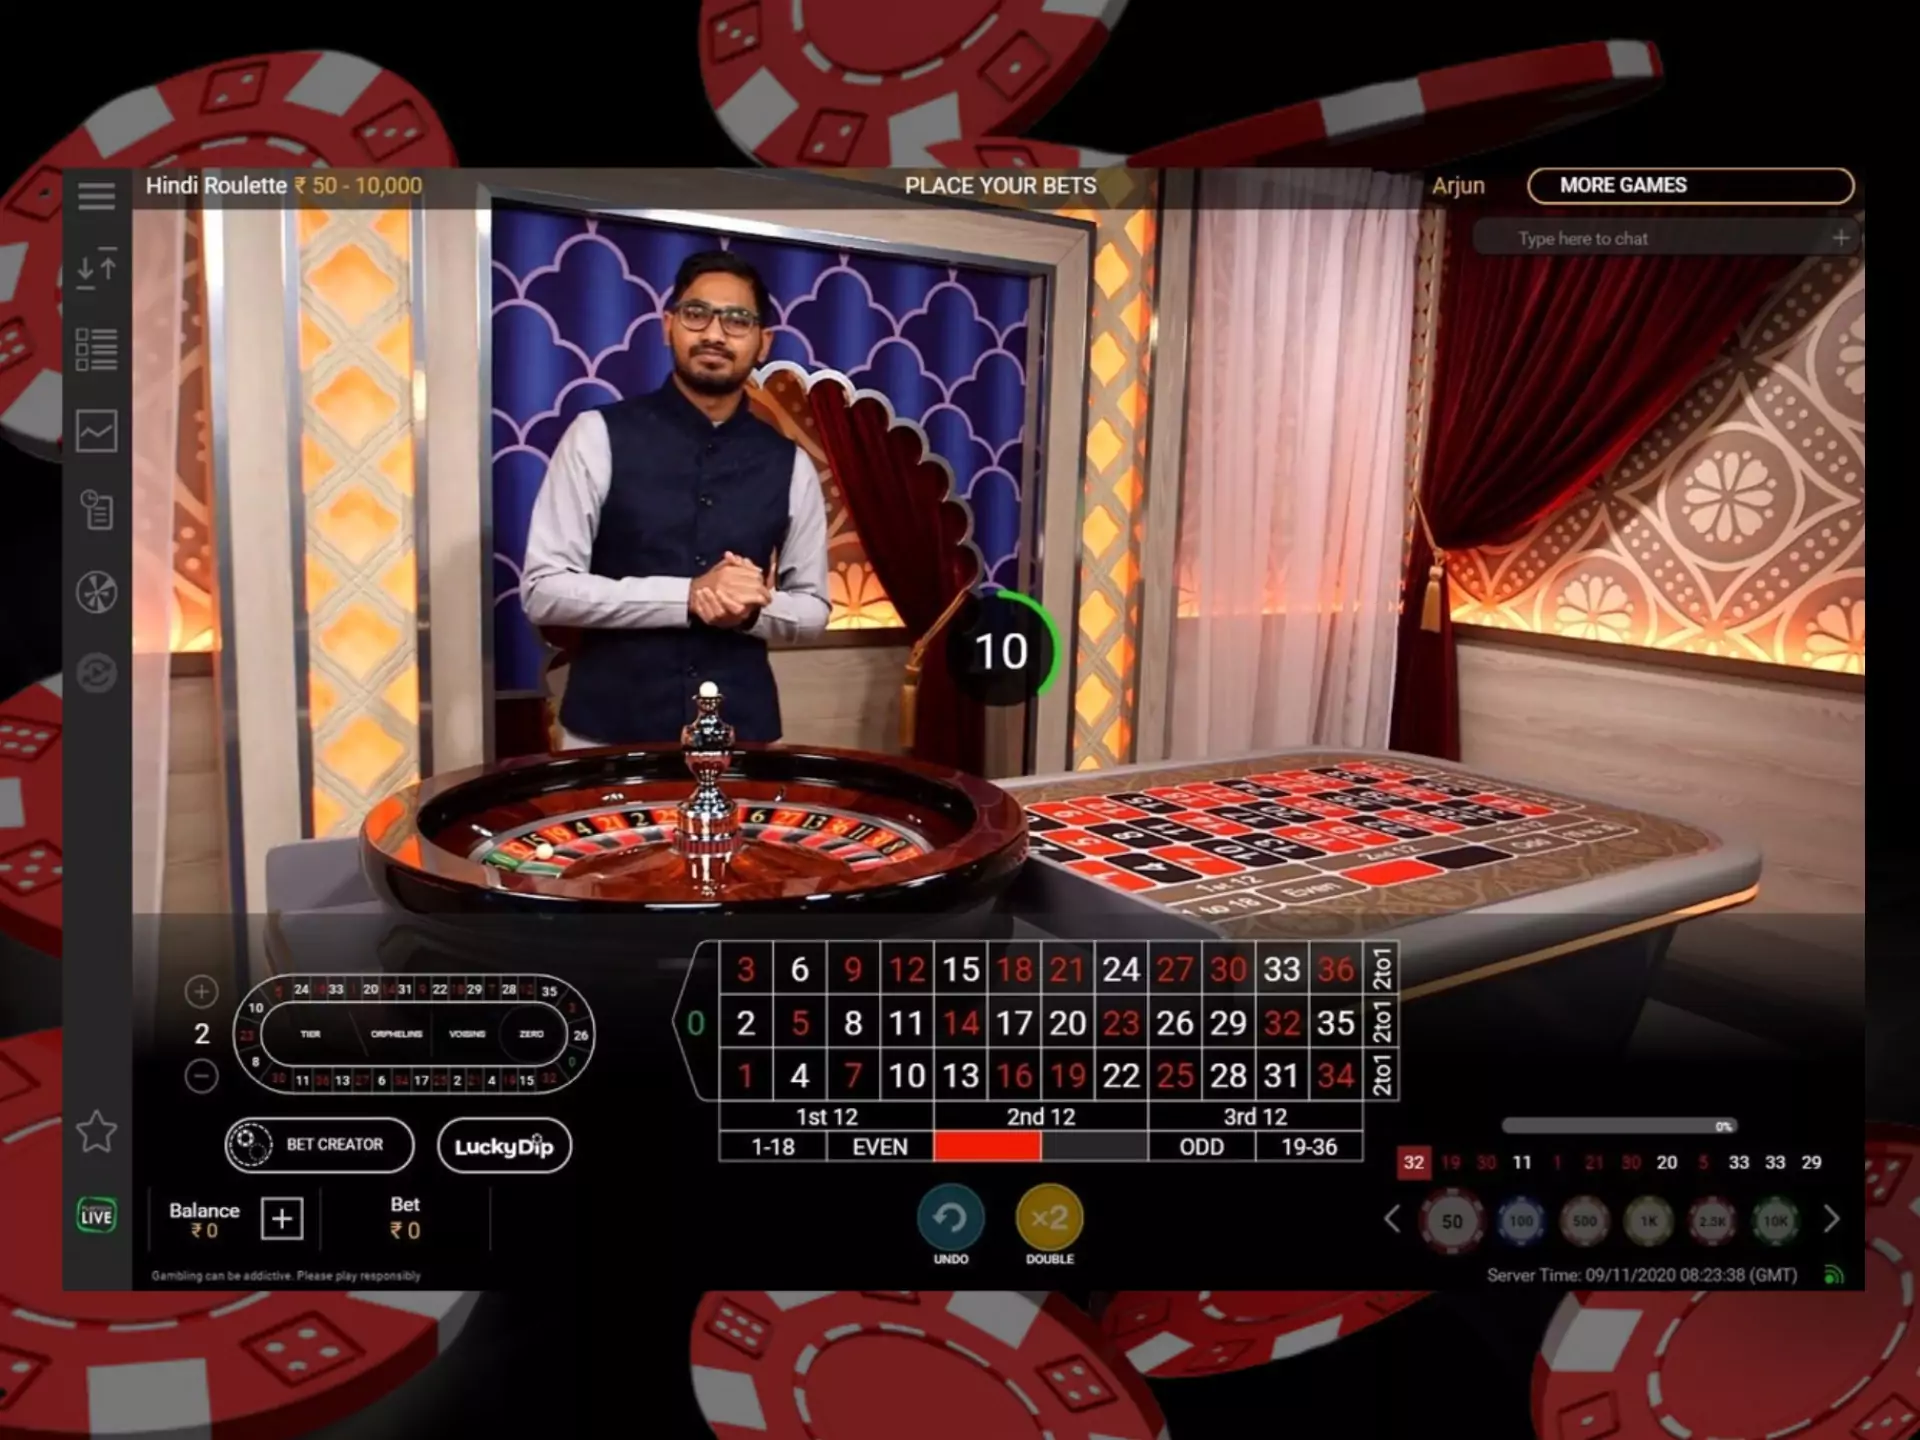 Bolywood roulette is a great etnertainment for players from India.